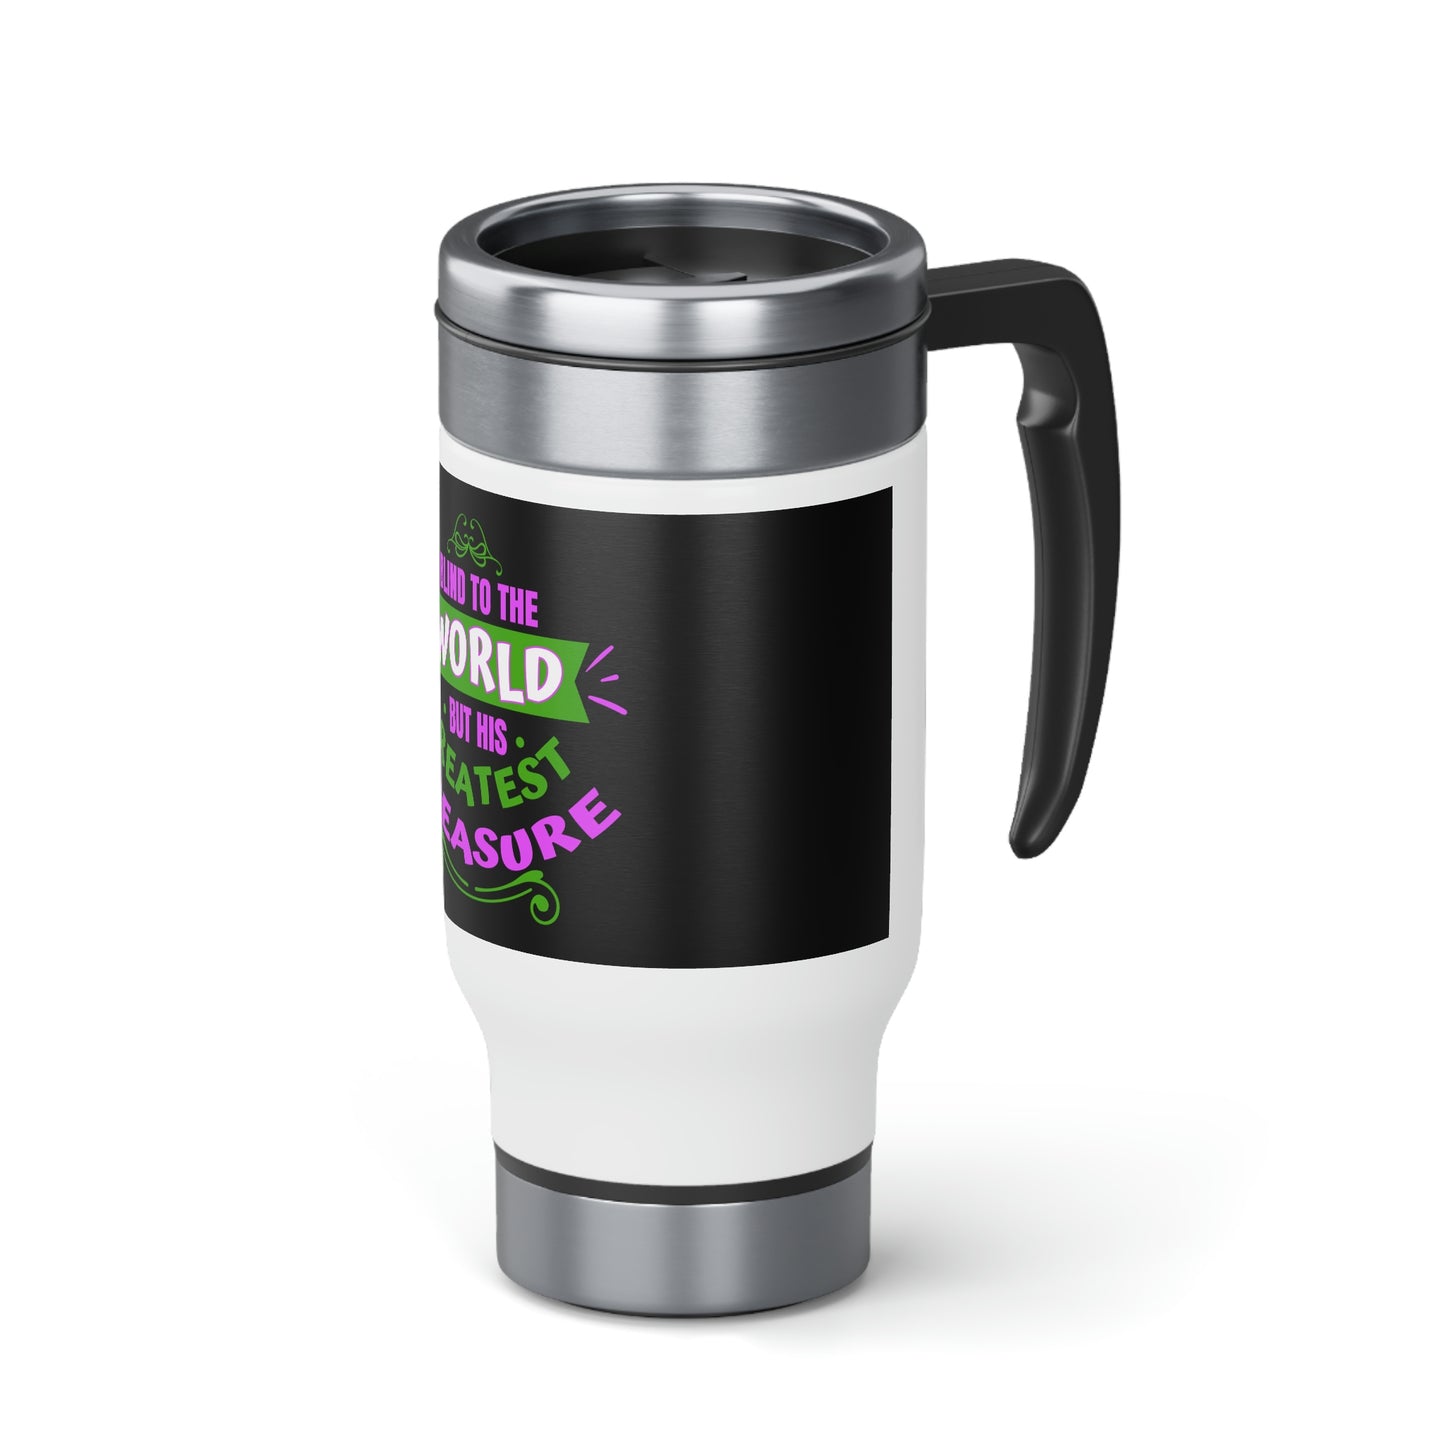 Blind To The World But His Greatest Treasure Travel Mug with Handle, 14oz